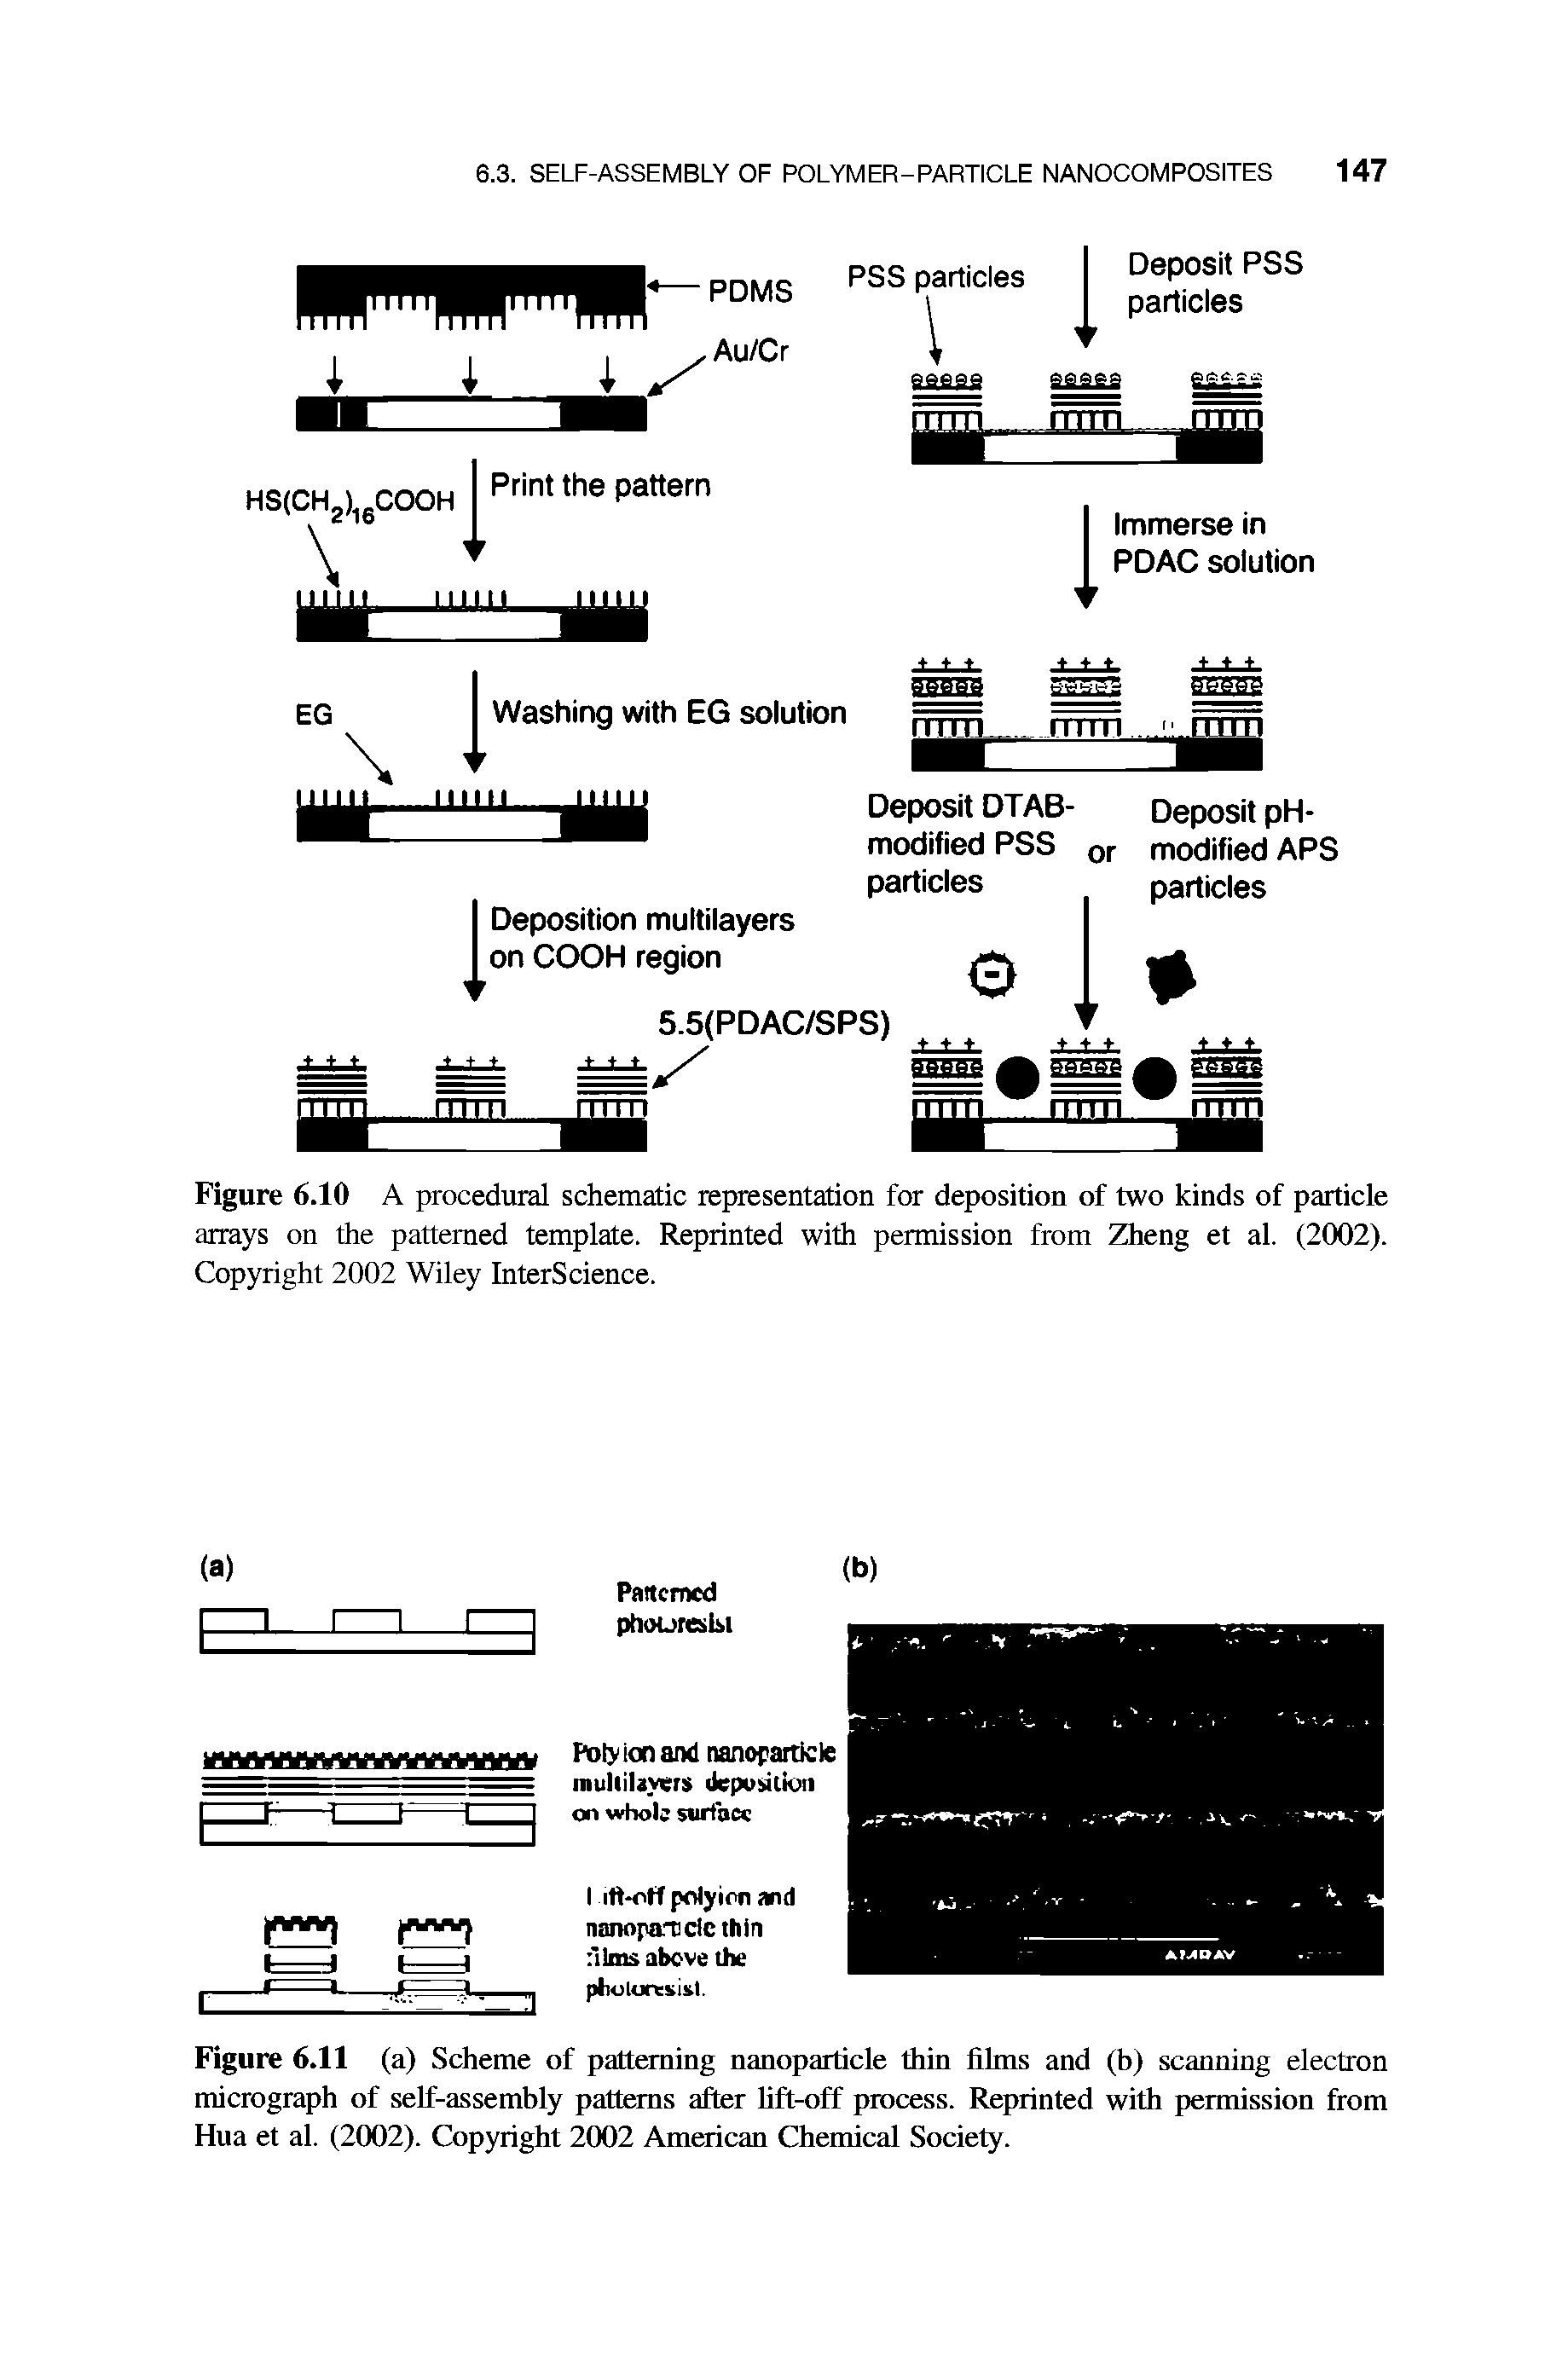 Figure 6.10 A procedural schematic representation for deposition of two kinds of particle arrays on the patterned template. Reprinted with permission from Zheng et al. (2002). Copyright 2002 Wiley InterScience.